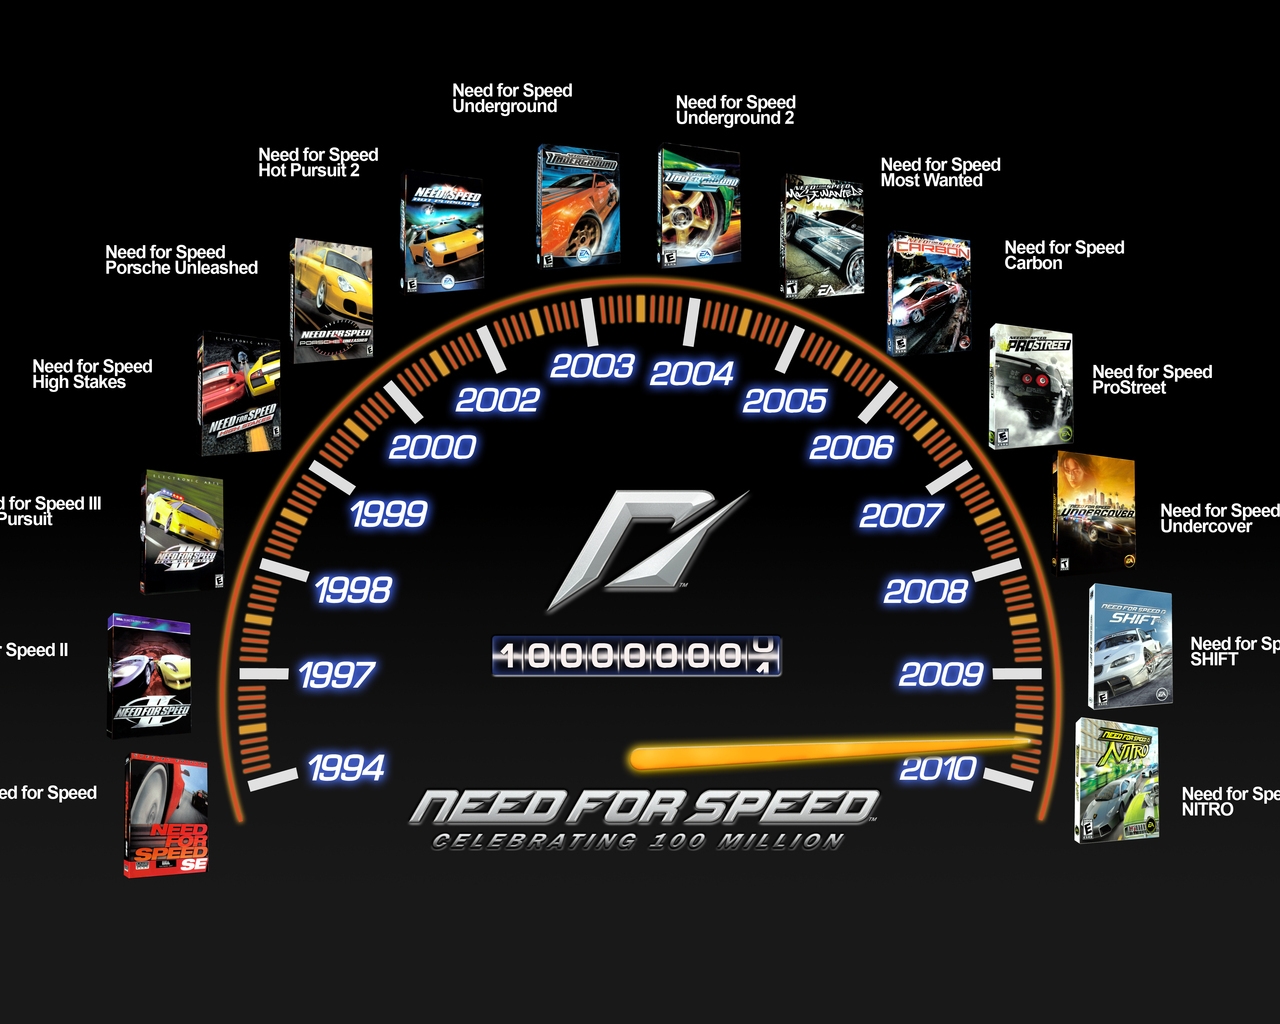 Need for Speed Celebration for 1280 x 1024 resolution